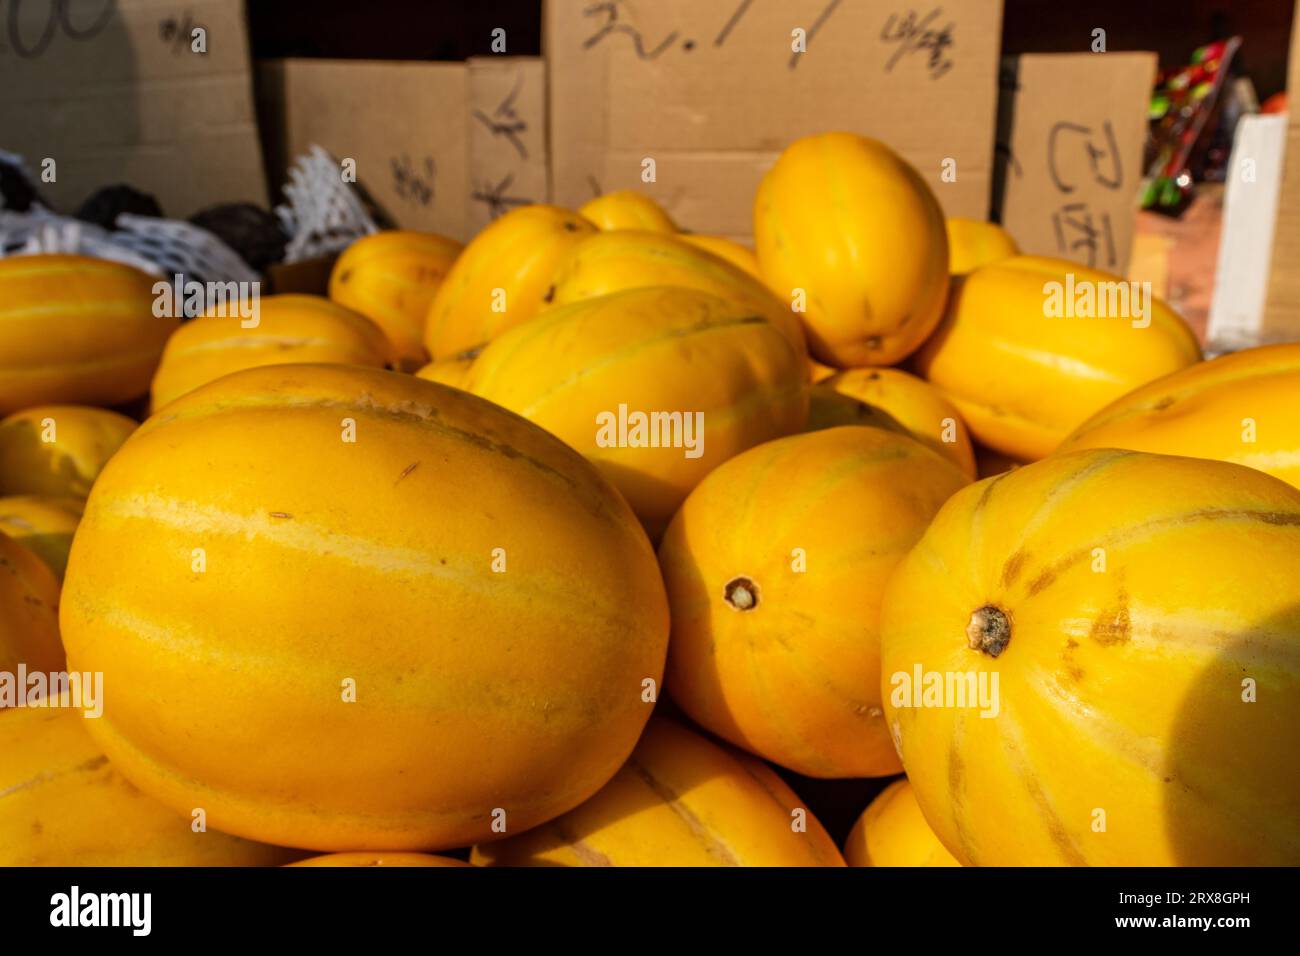 Yellow melons - oblong and smooth - stacked in a market setting - natural daylight Stock Photo